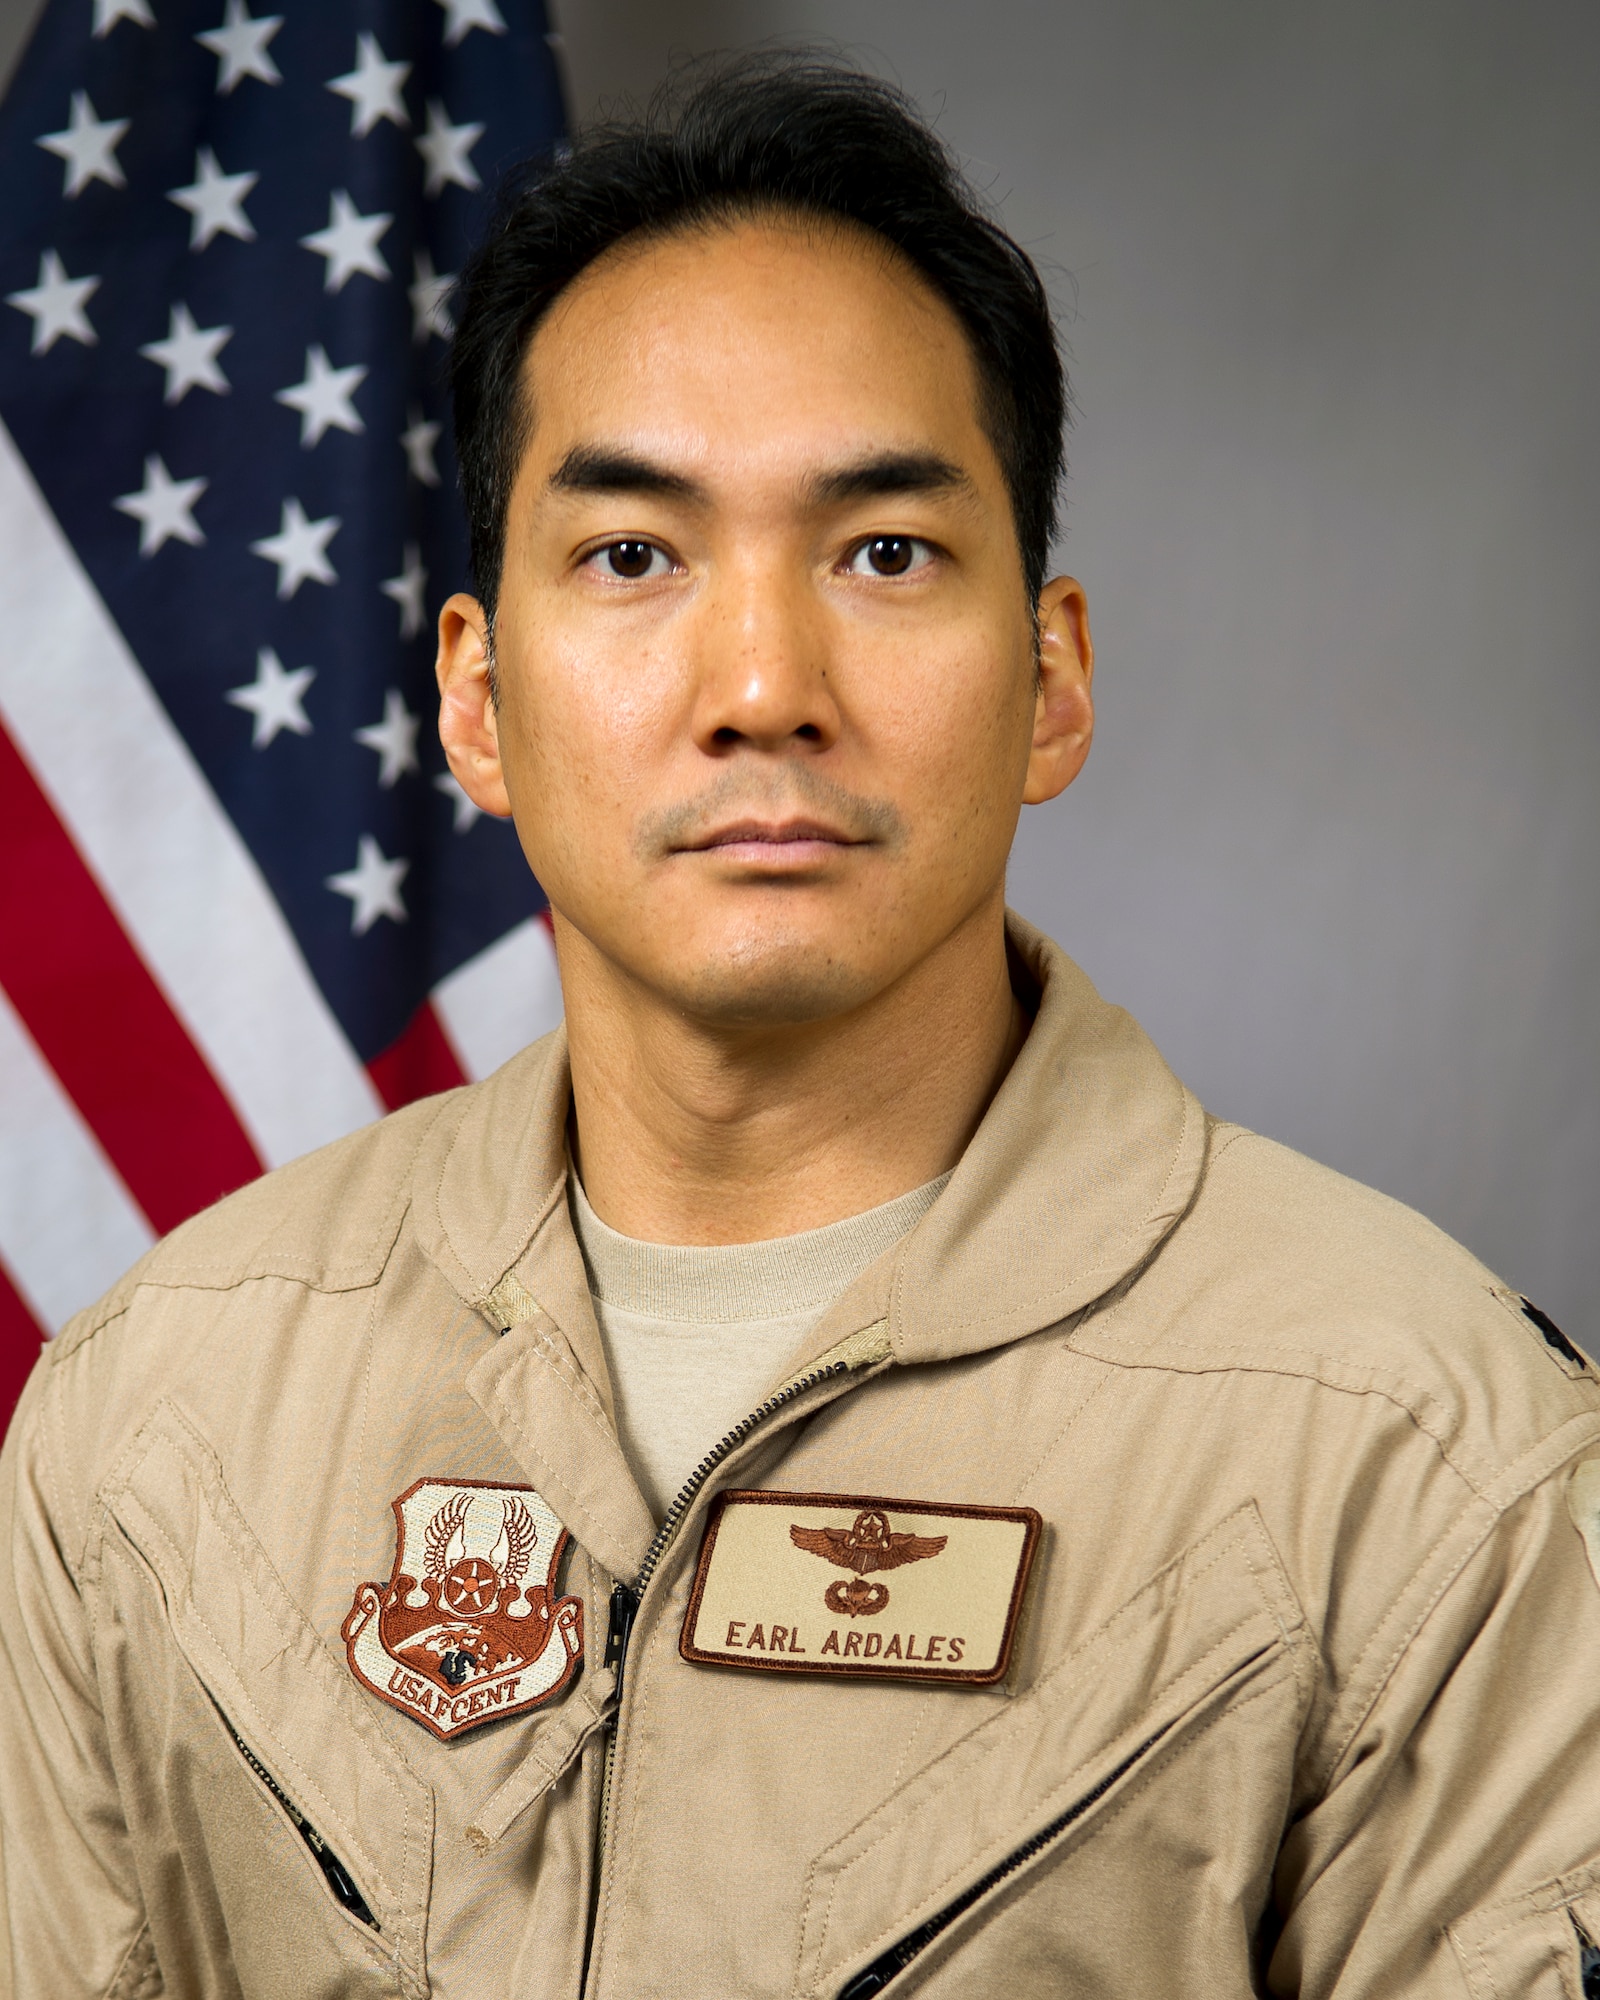 Deployed portrait of Lt. Col. Earl Ardales, 386th Air Expeditionary Wing.  (U.S. Air Force photo by Senior Master Sgt. Burke Baker)